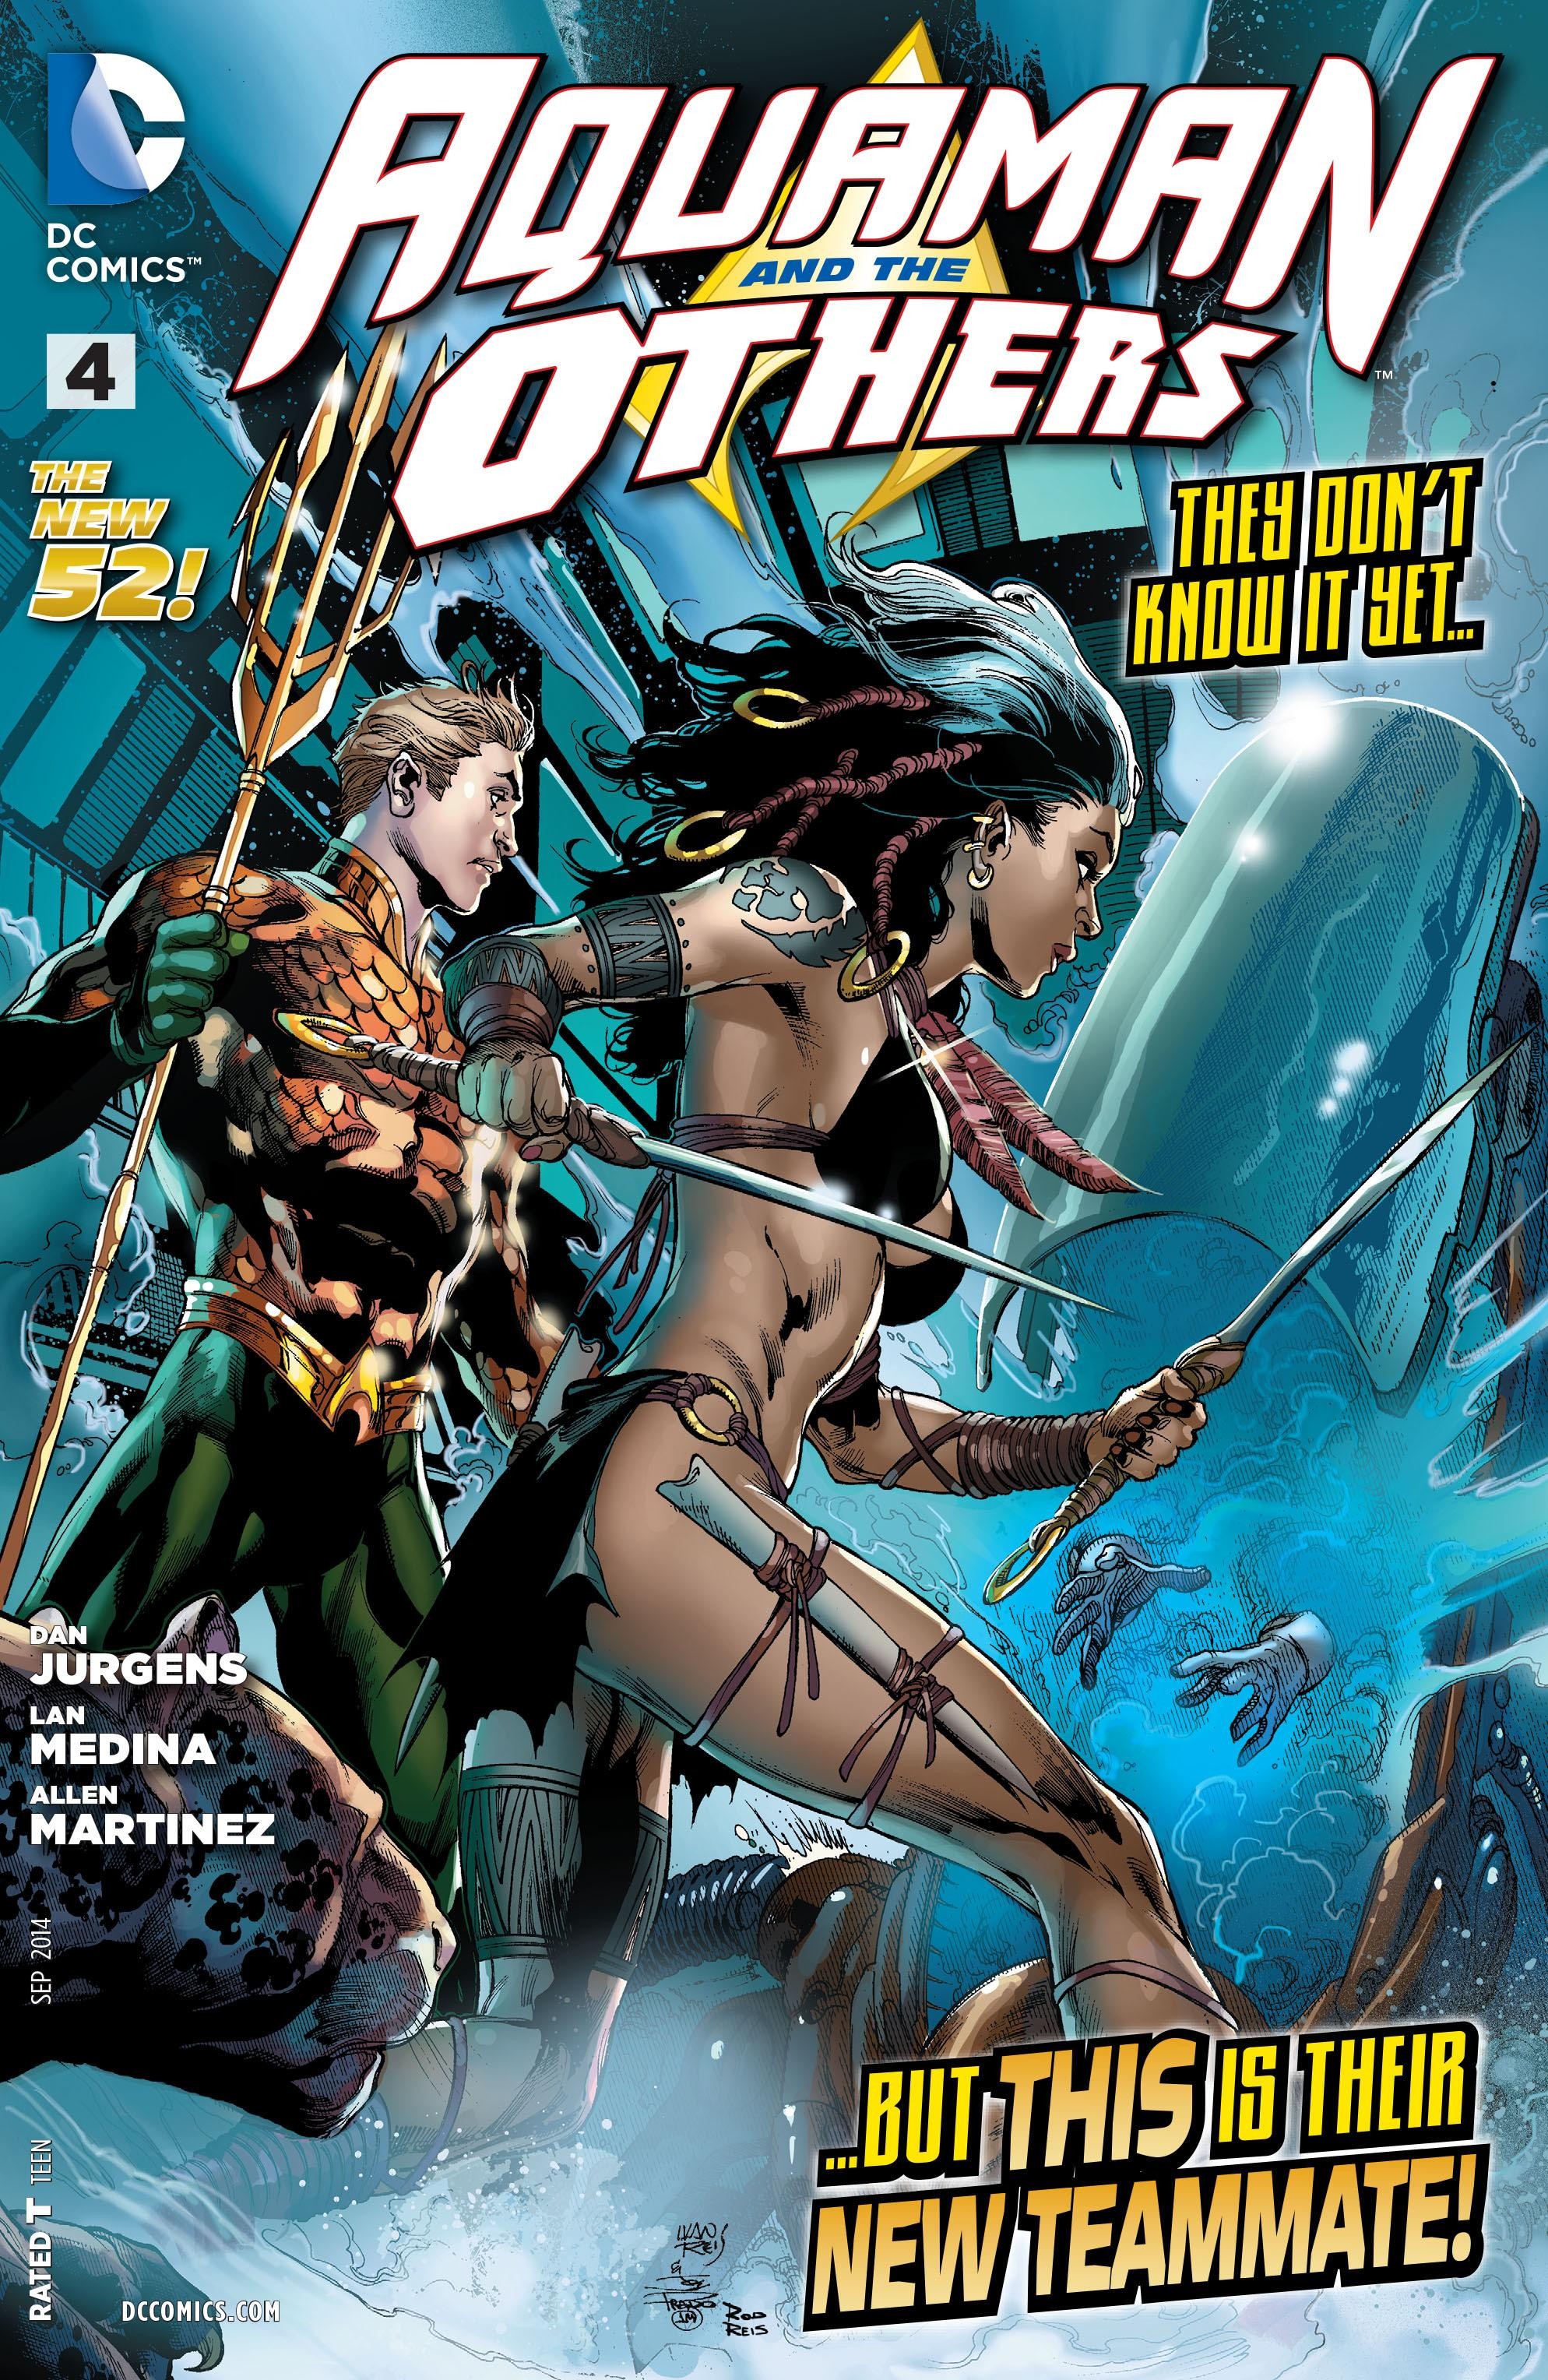 Aquaman and the Others Vol. 1 #4